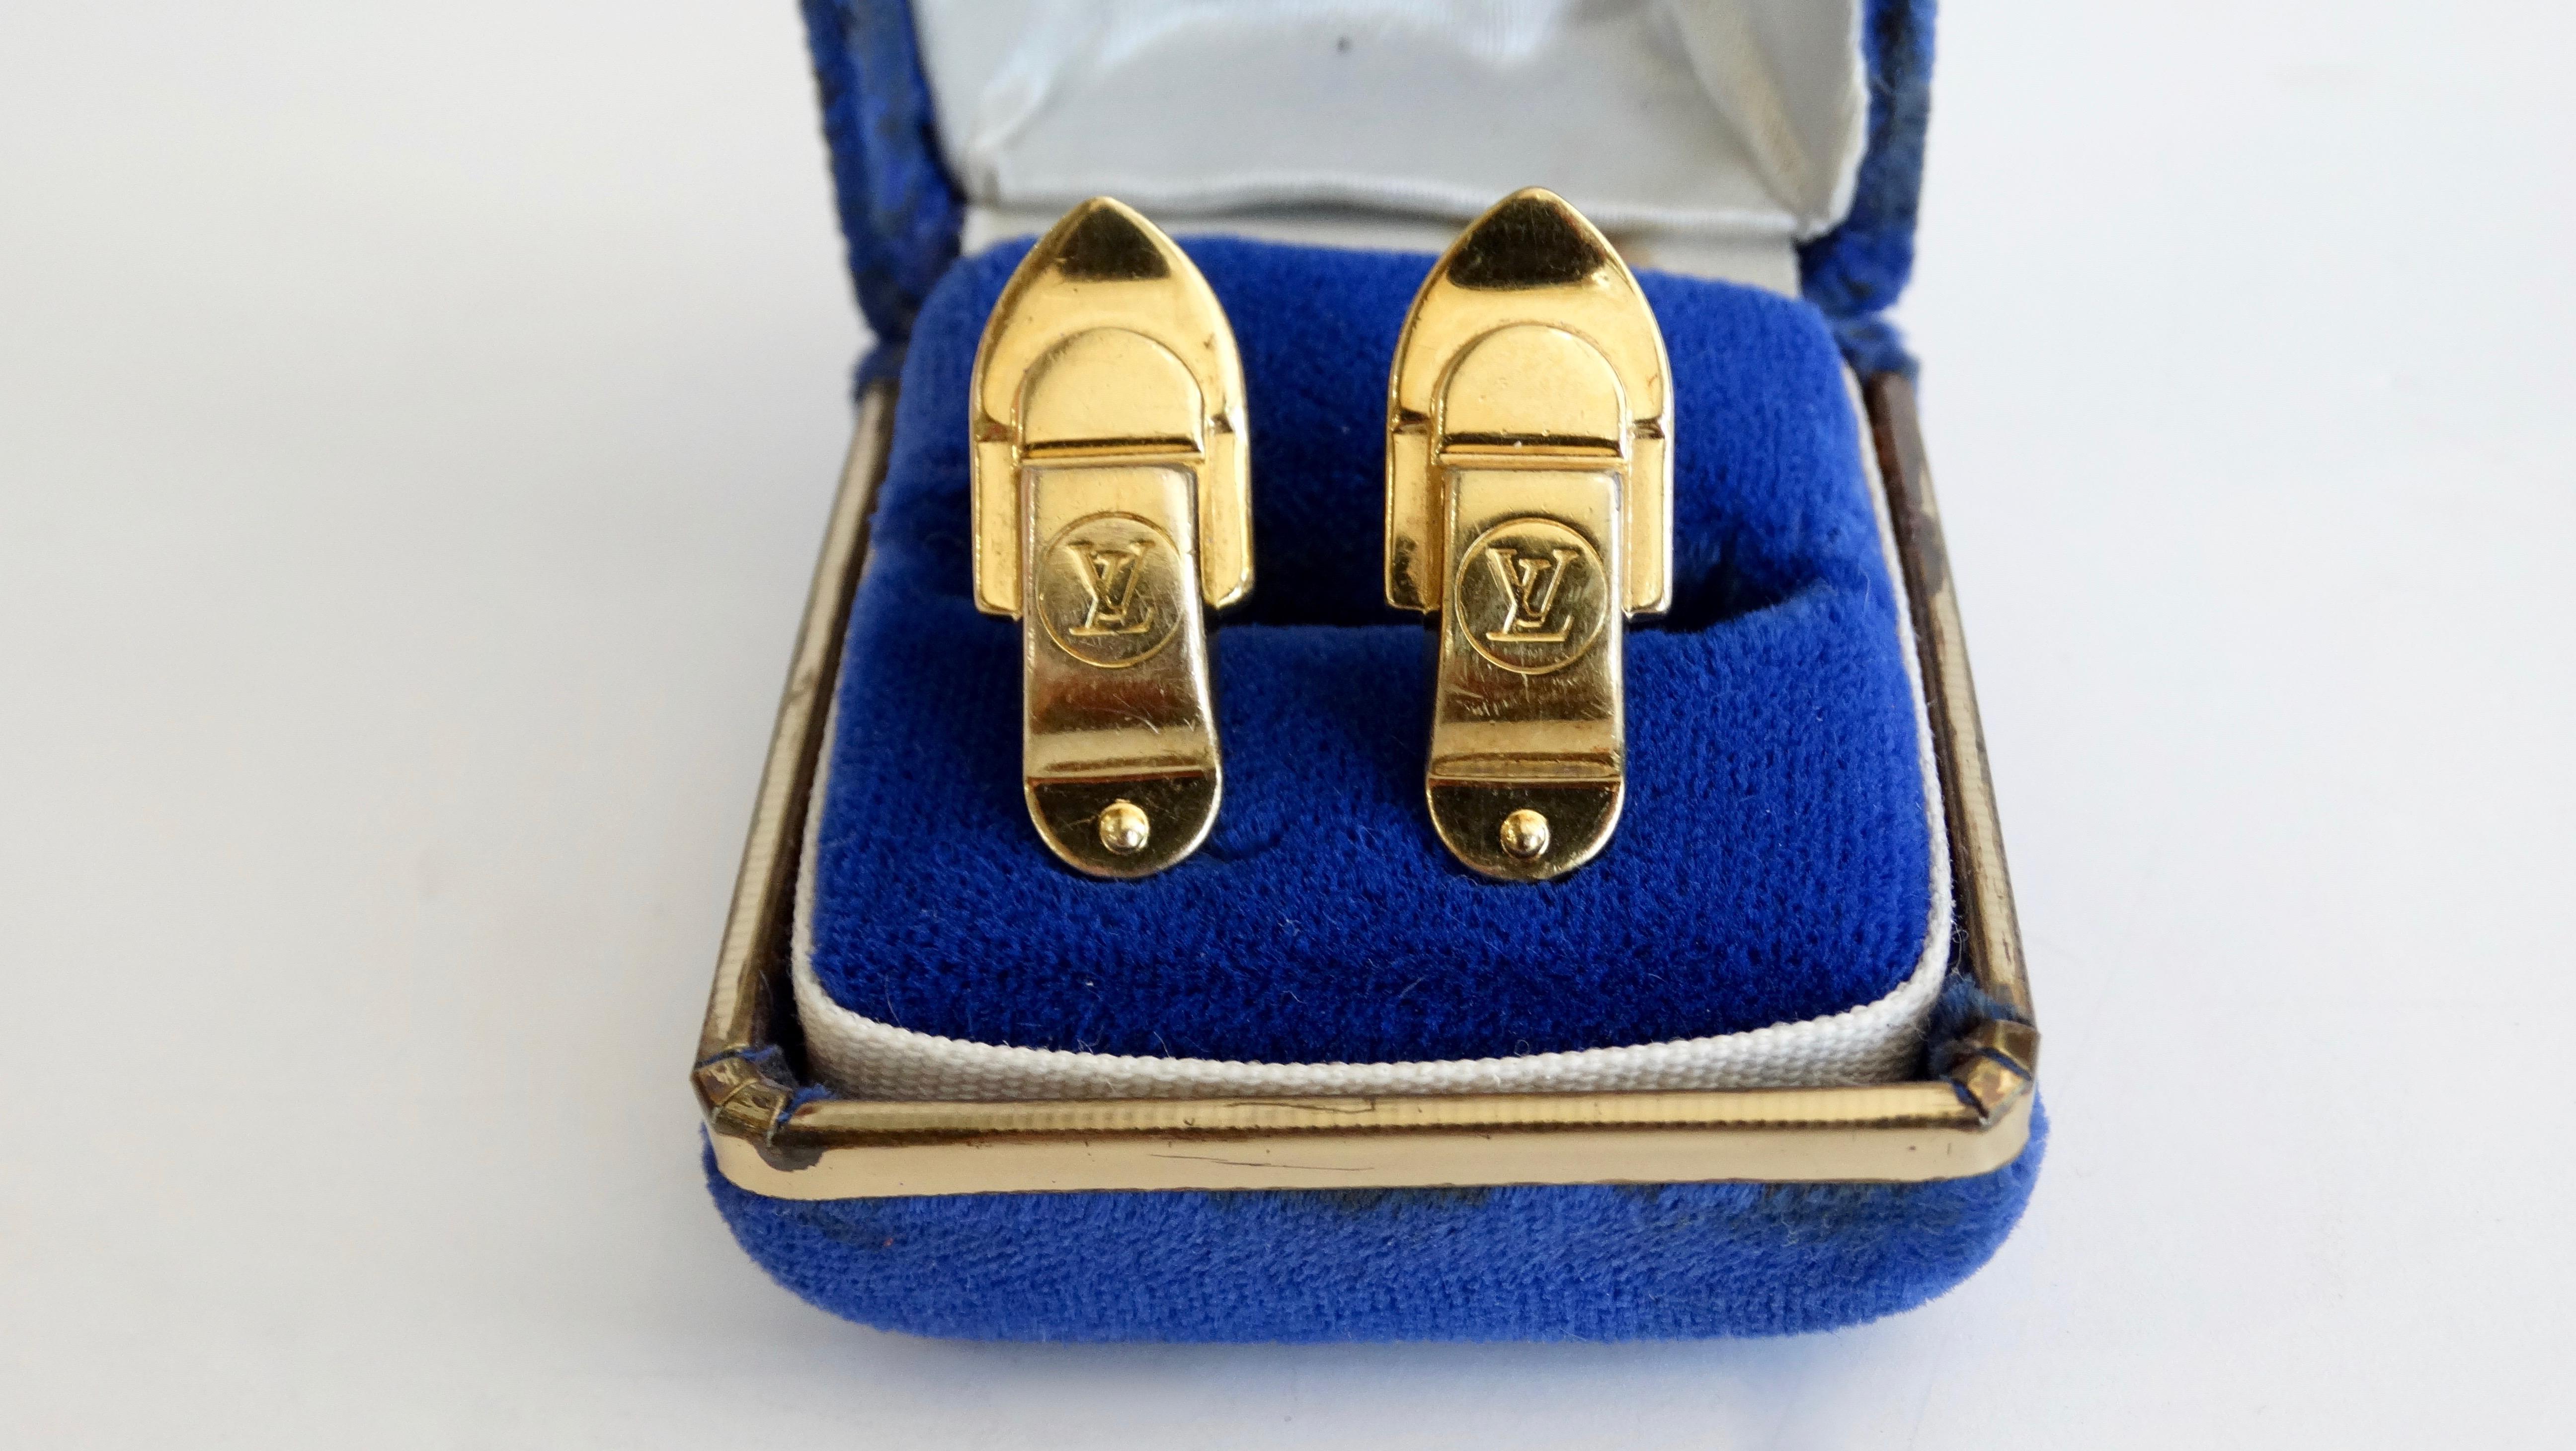 Less is more with these amazing Louie Vuitton cufflinks! Circa late 20th century, these gold plated cufflinks are modeled after the buckles found on Louie Vuitton's luggage and are stamped with the signature LV logo. Timeless and subtle, these